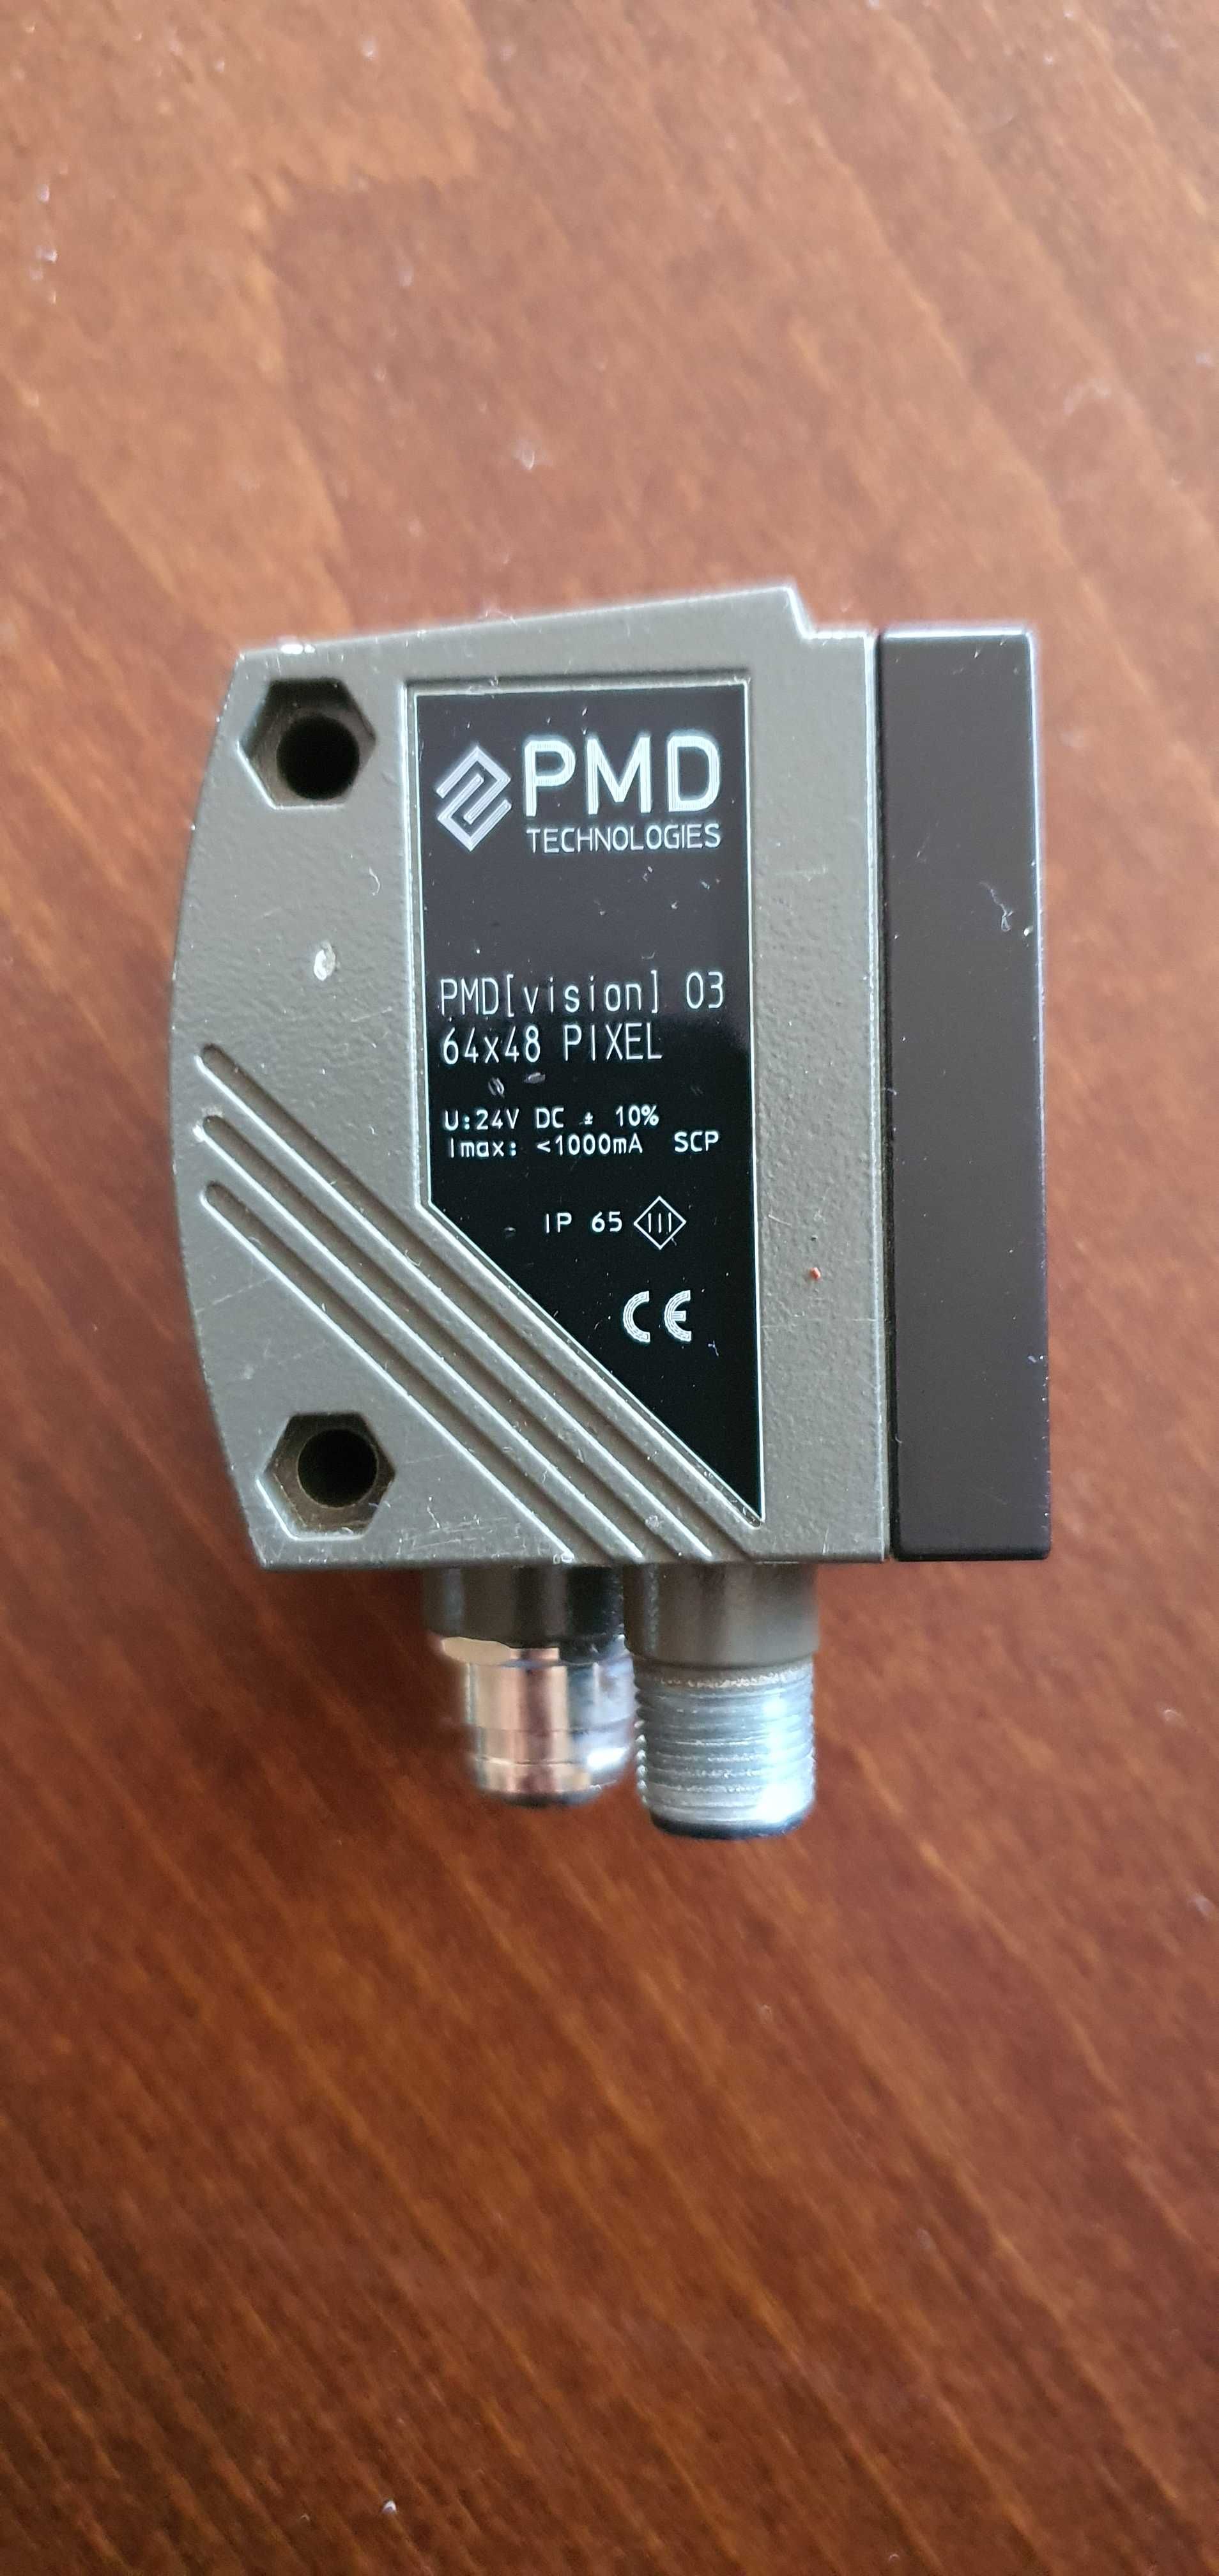 Pmd Technologies Pmd (Vision) S3 64X48 Pixel